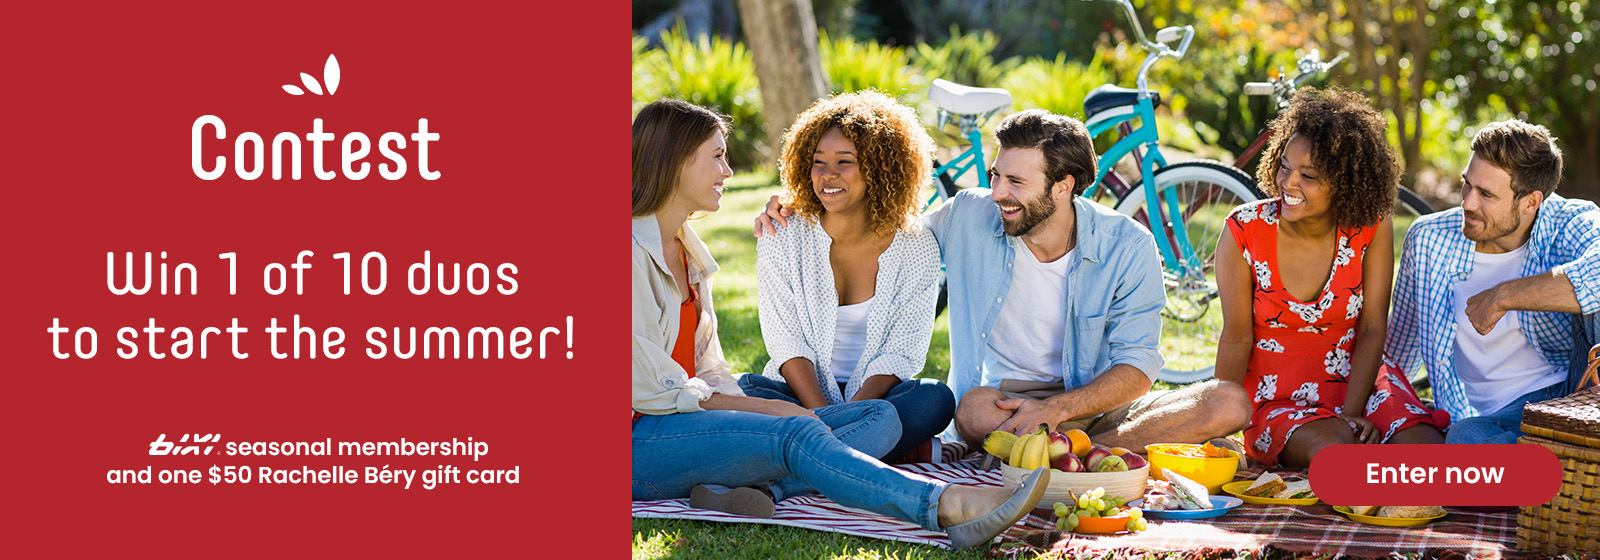 An image of friends sitting together with text reading, “Contest. Win 1 of 10 duos to start the summer! bixi seasonal membership and one $50 Rachelle Béry gift card.” Know more with the “Enter now” button.